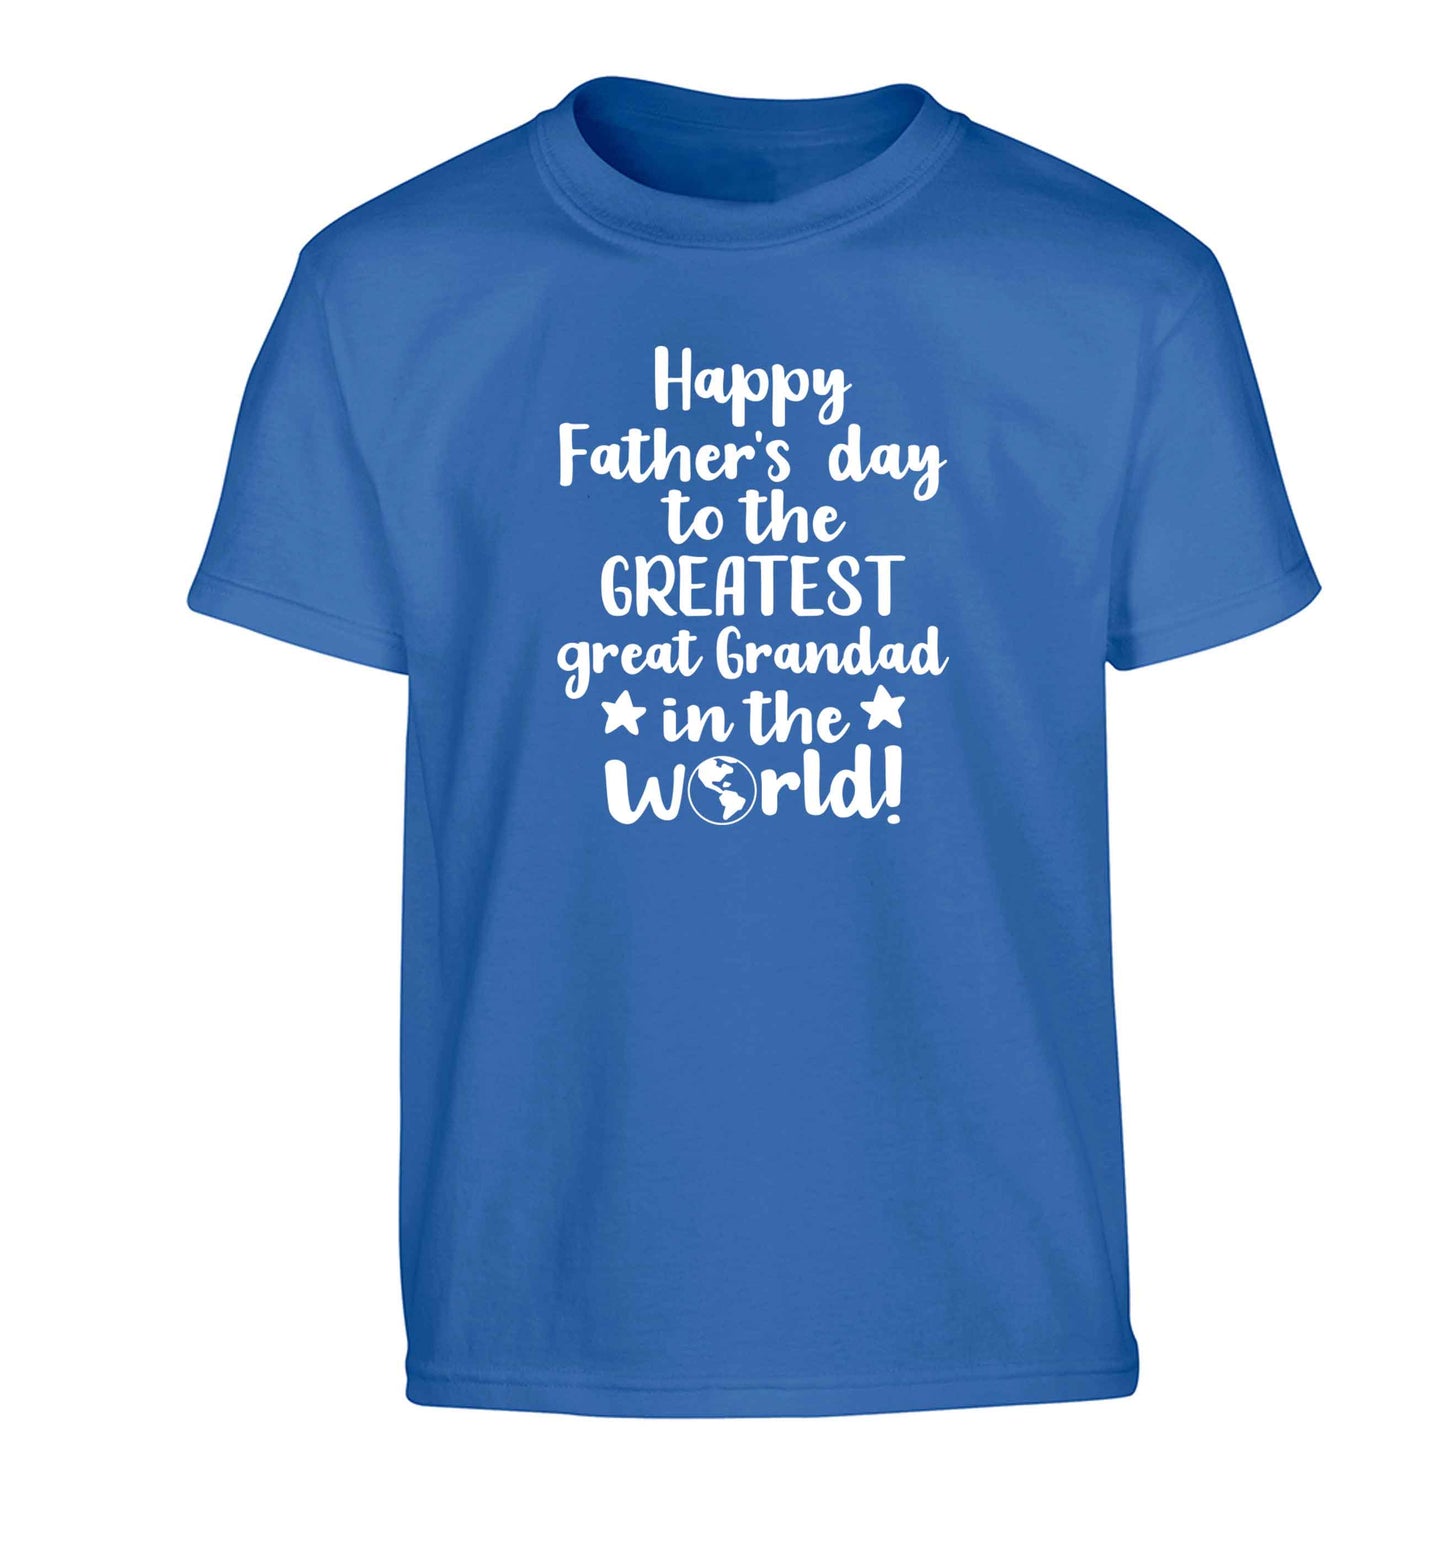 Happy Father's day to the greatest great grandad in the world Children's blue Tshirt 12-13 Years